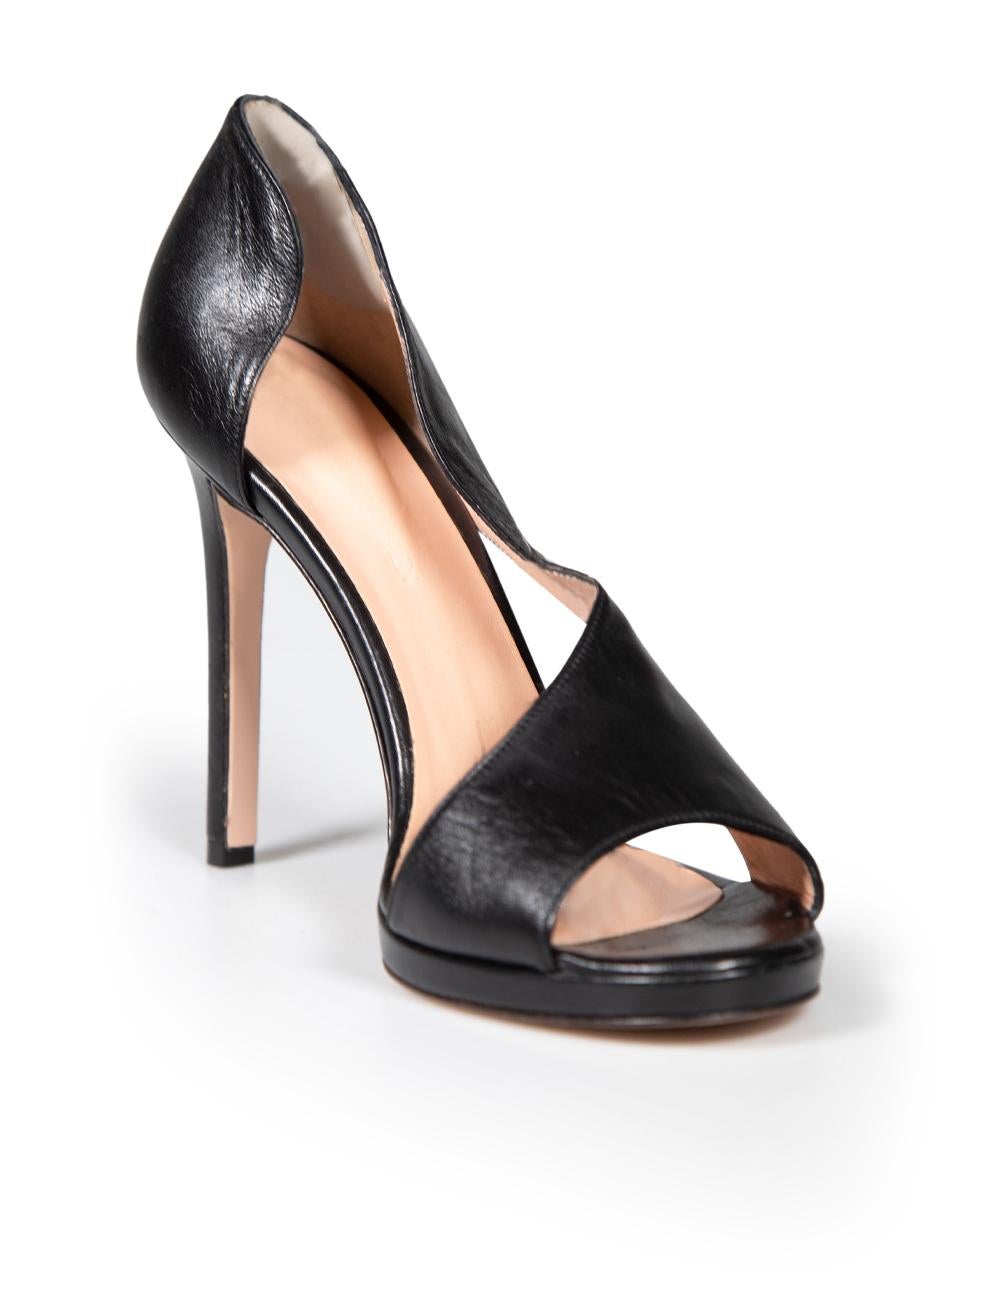 CONDITION is Very good. Minimal wear to heels is evident. Minimal wear to soles, with abrasions to the heel post on this used Fabrizio Bulckaen designer resale item.
 
 
 
 Details
 
 
 Black
 
 Leather
 
 Heels
 
 Open toe
 
 Side cut out detail
 
